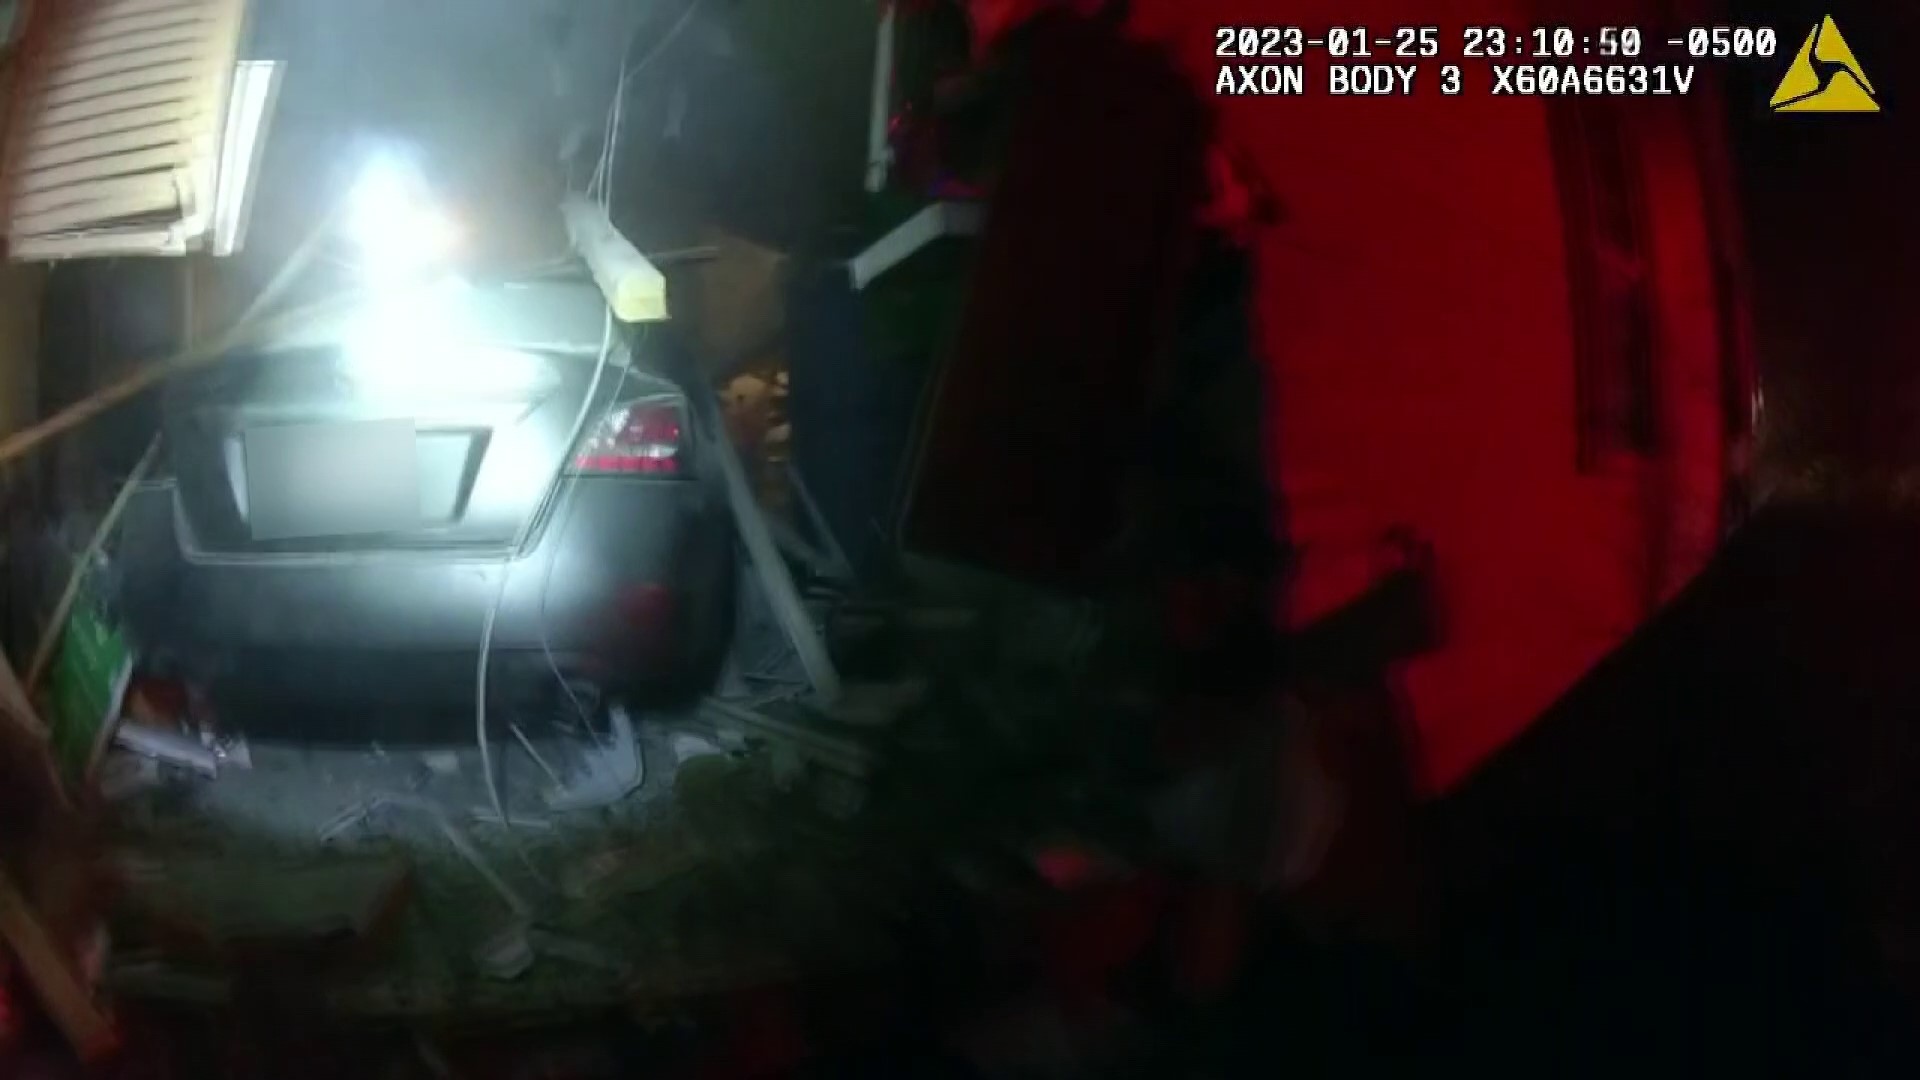 The video shows a deputy rescuing a woman who crashed into a garage in Pickaway County on Wednesday.